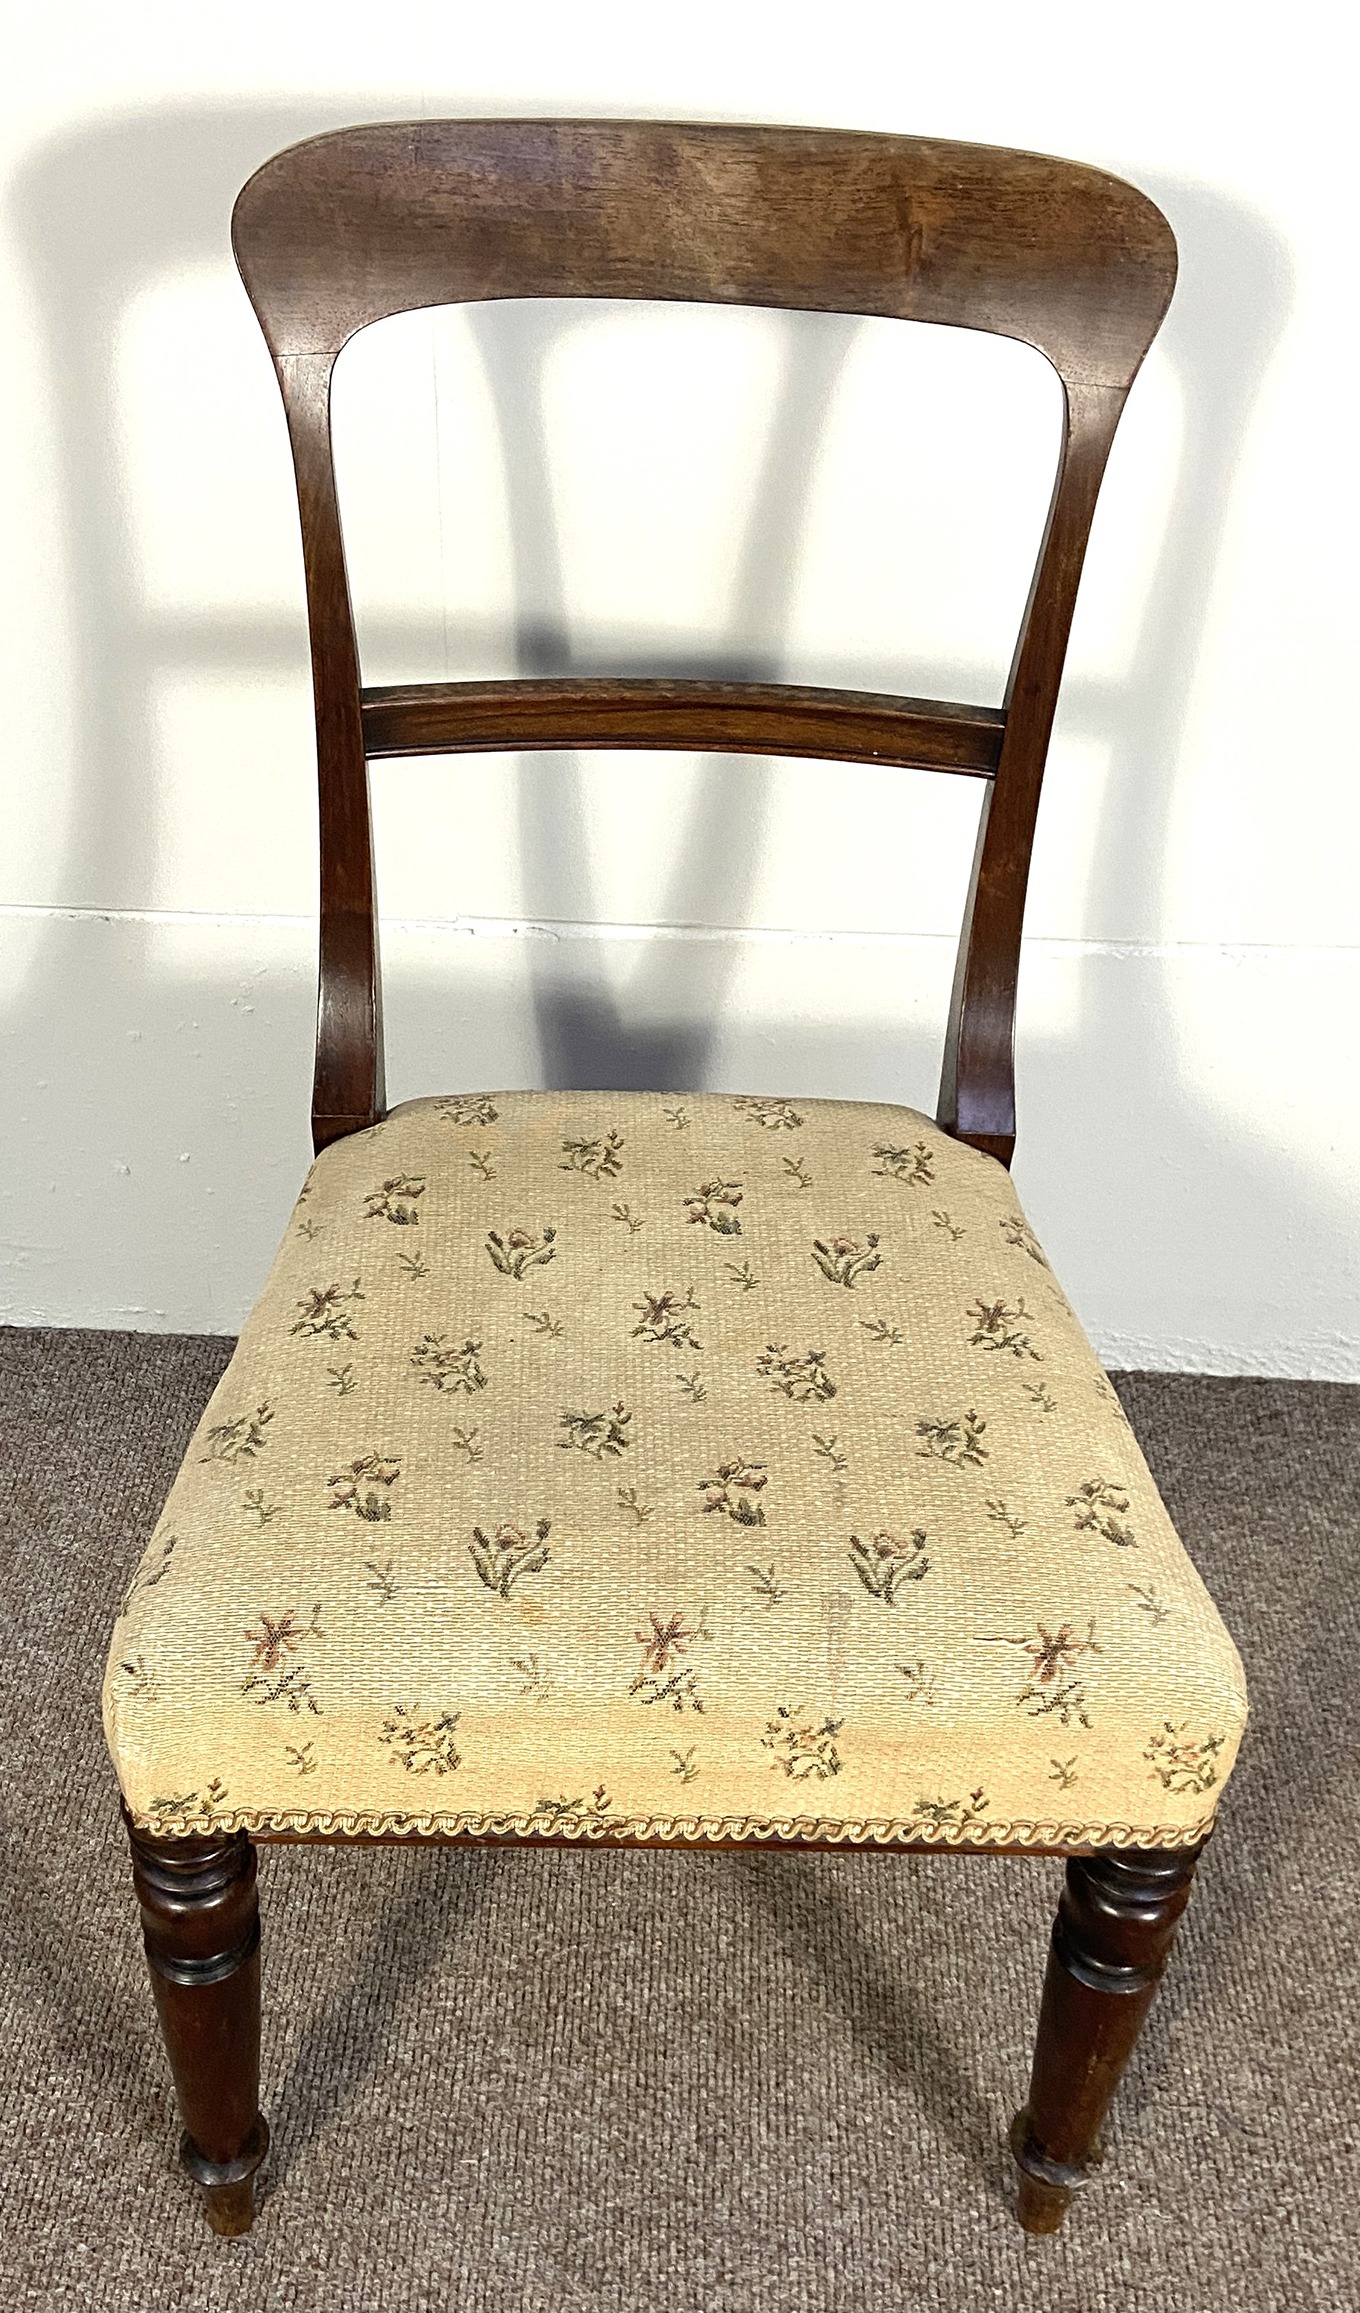 A pair of 19th century mahogany framed dining chairs, and a small salon chair with carved back (3) - Image 7 of 12